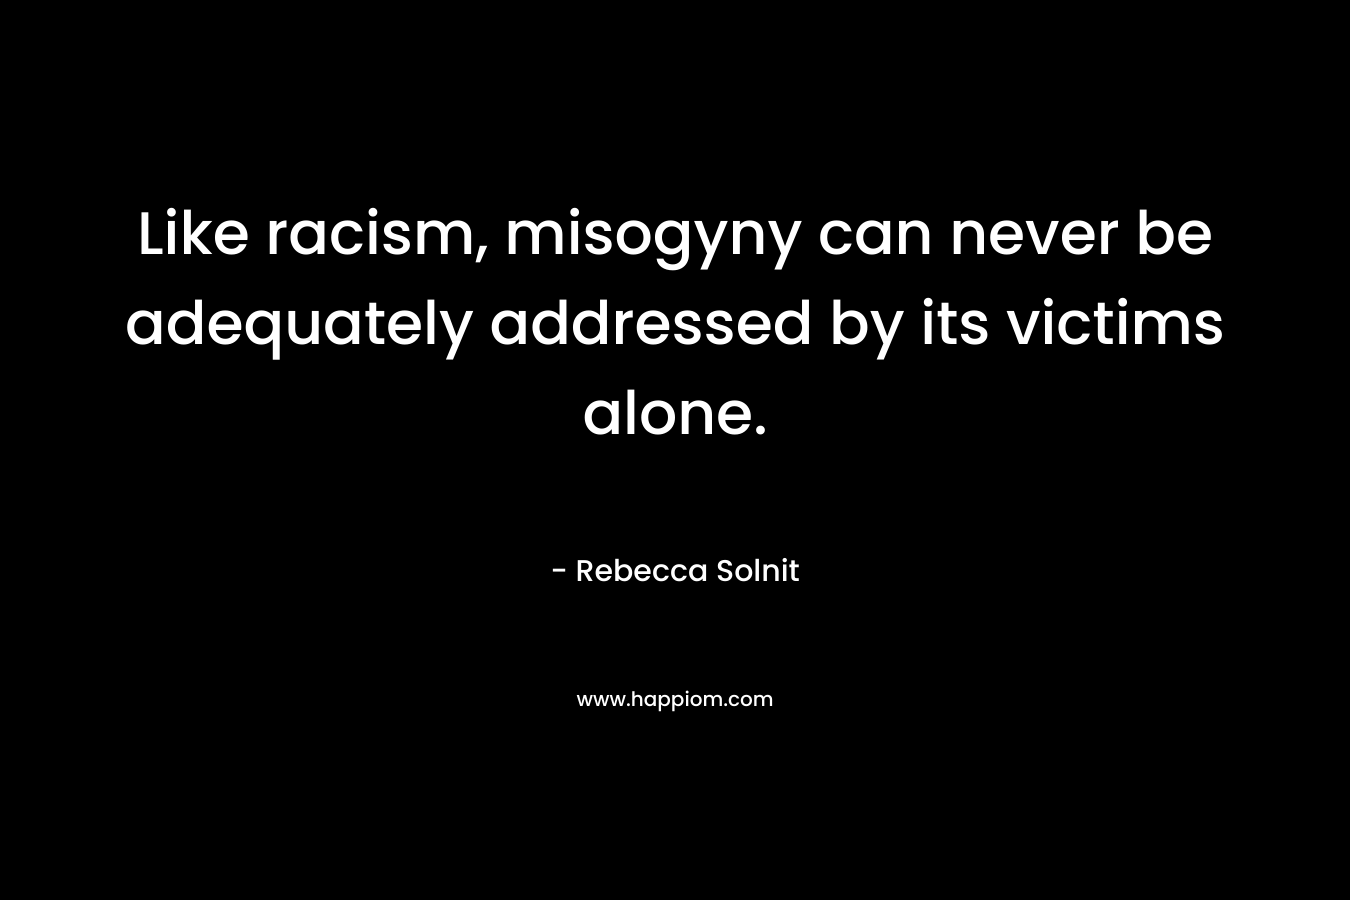 Like racism, misogyny can never be adequately addressed by its victims alone.